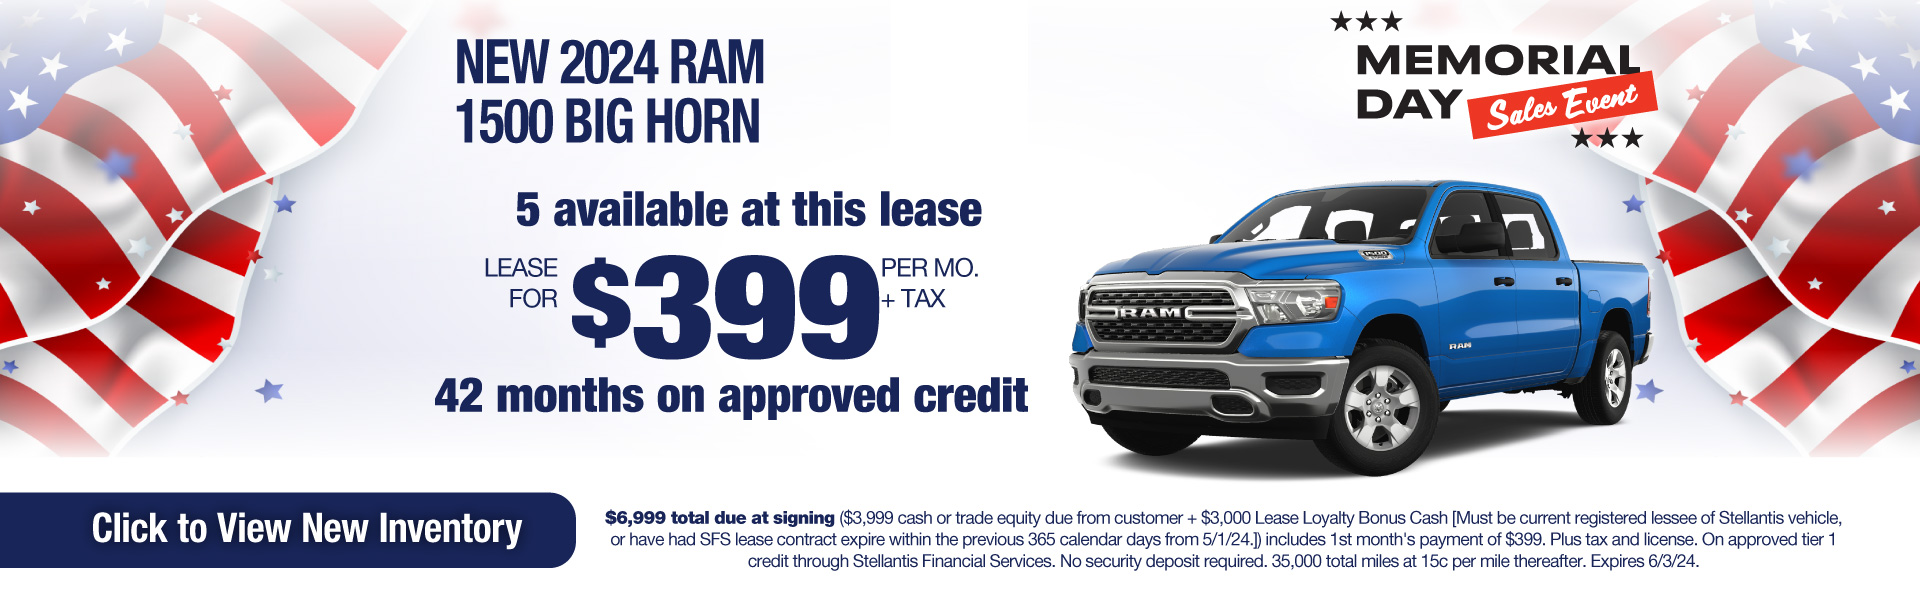 Lease a New 2024 RAM 1500 Big Horn for $399 per month plus tax! Expires 6/3/24.